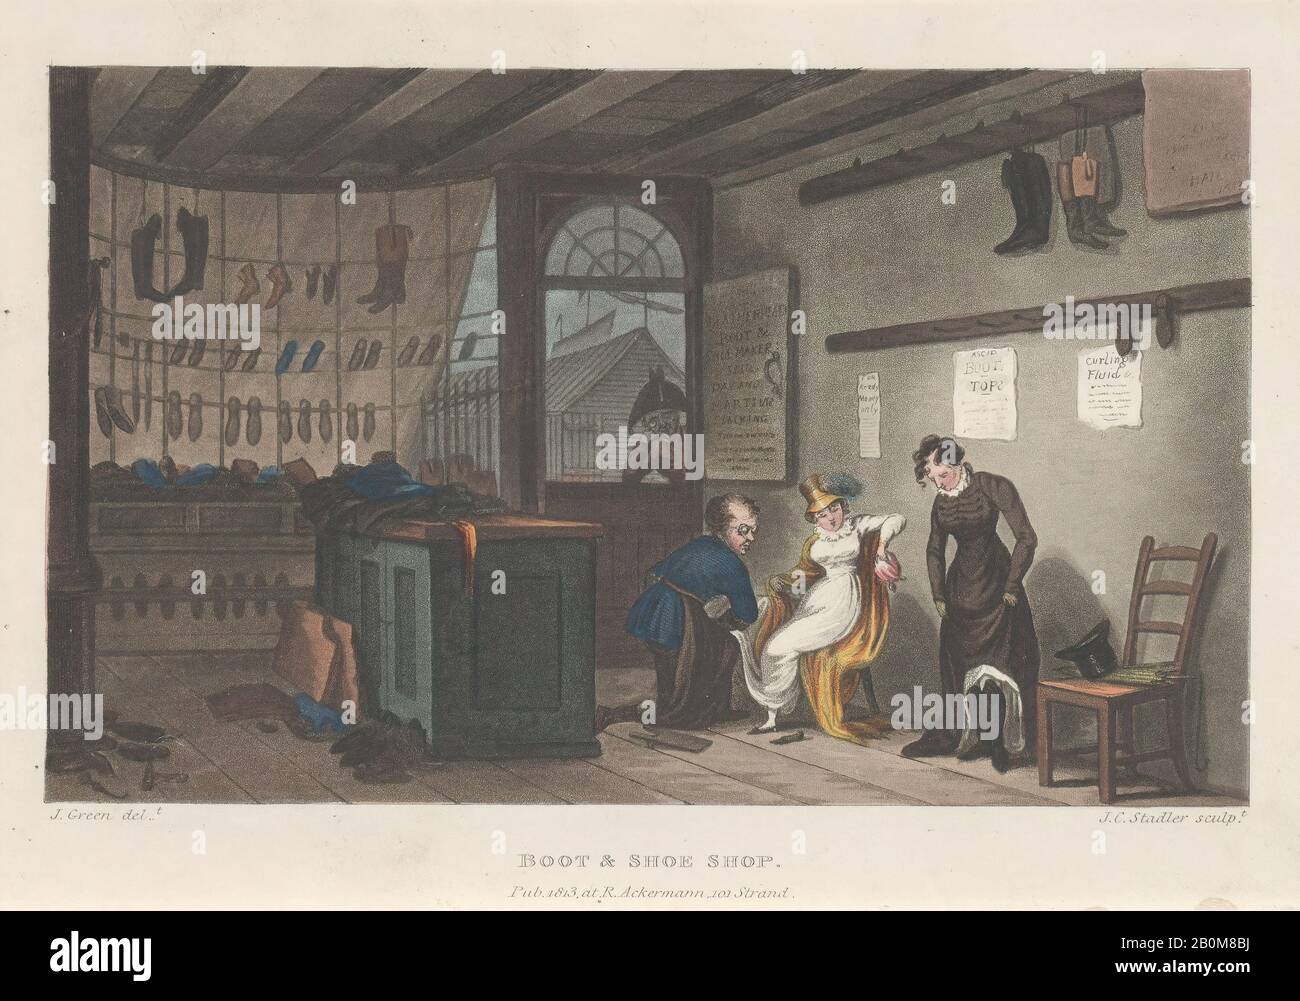 Thomas Rowlandson, Boot & Shoe Shop, from 'Poetical Sketches of Scarborough', 'Poetical Sketches of Scarborough', Thomas Rowlandson (British, London 1757–1827 London), Joseph Constantine Stadler (German, active London, 1780–1822), After James Green (British, Leytonstone 1771–1834 Bath), 1813, Hand-colored etching and aquatint, Sheet: 5 1/2 × 8 1/4 in. (14 × 21 cm), Prints Stock Photo